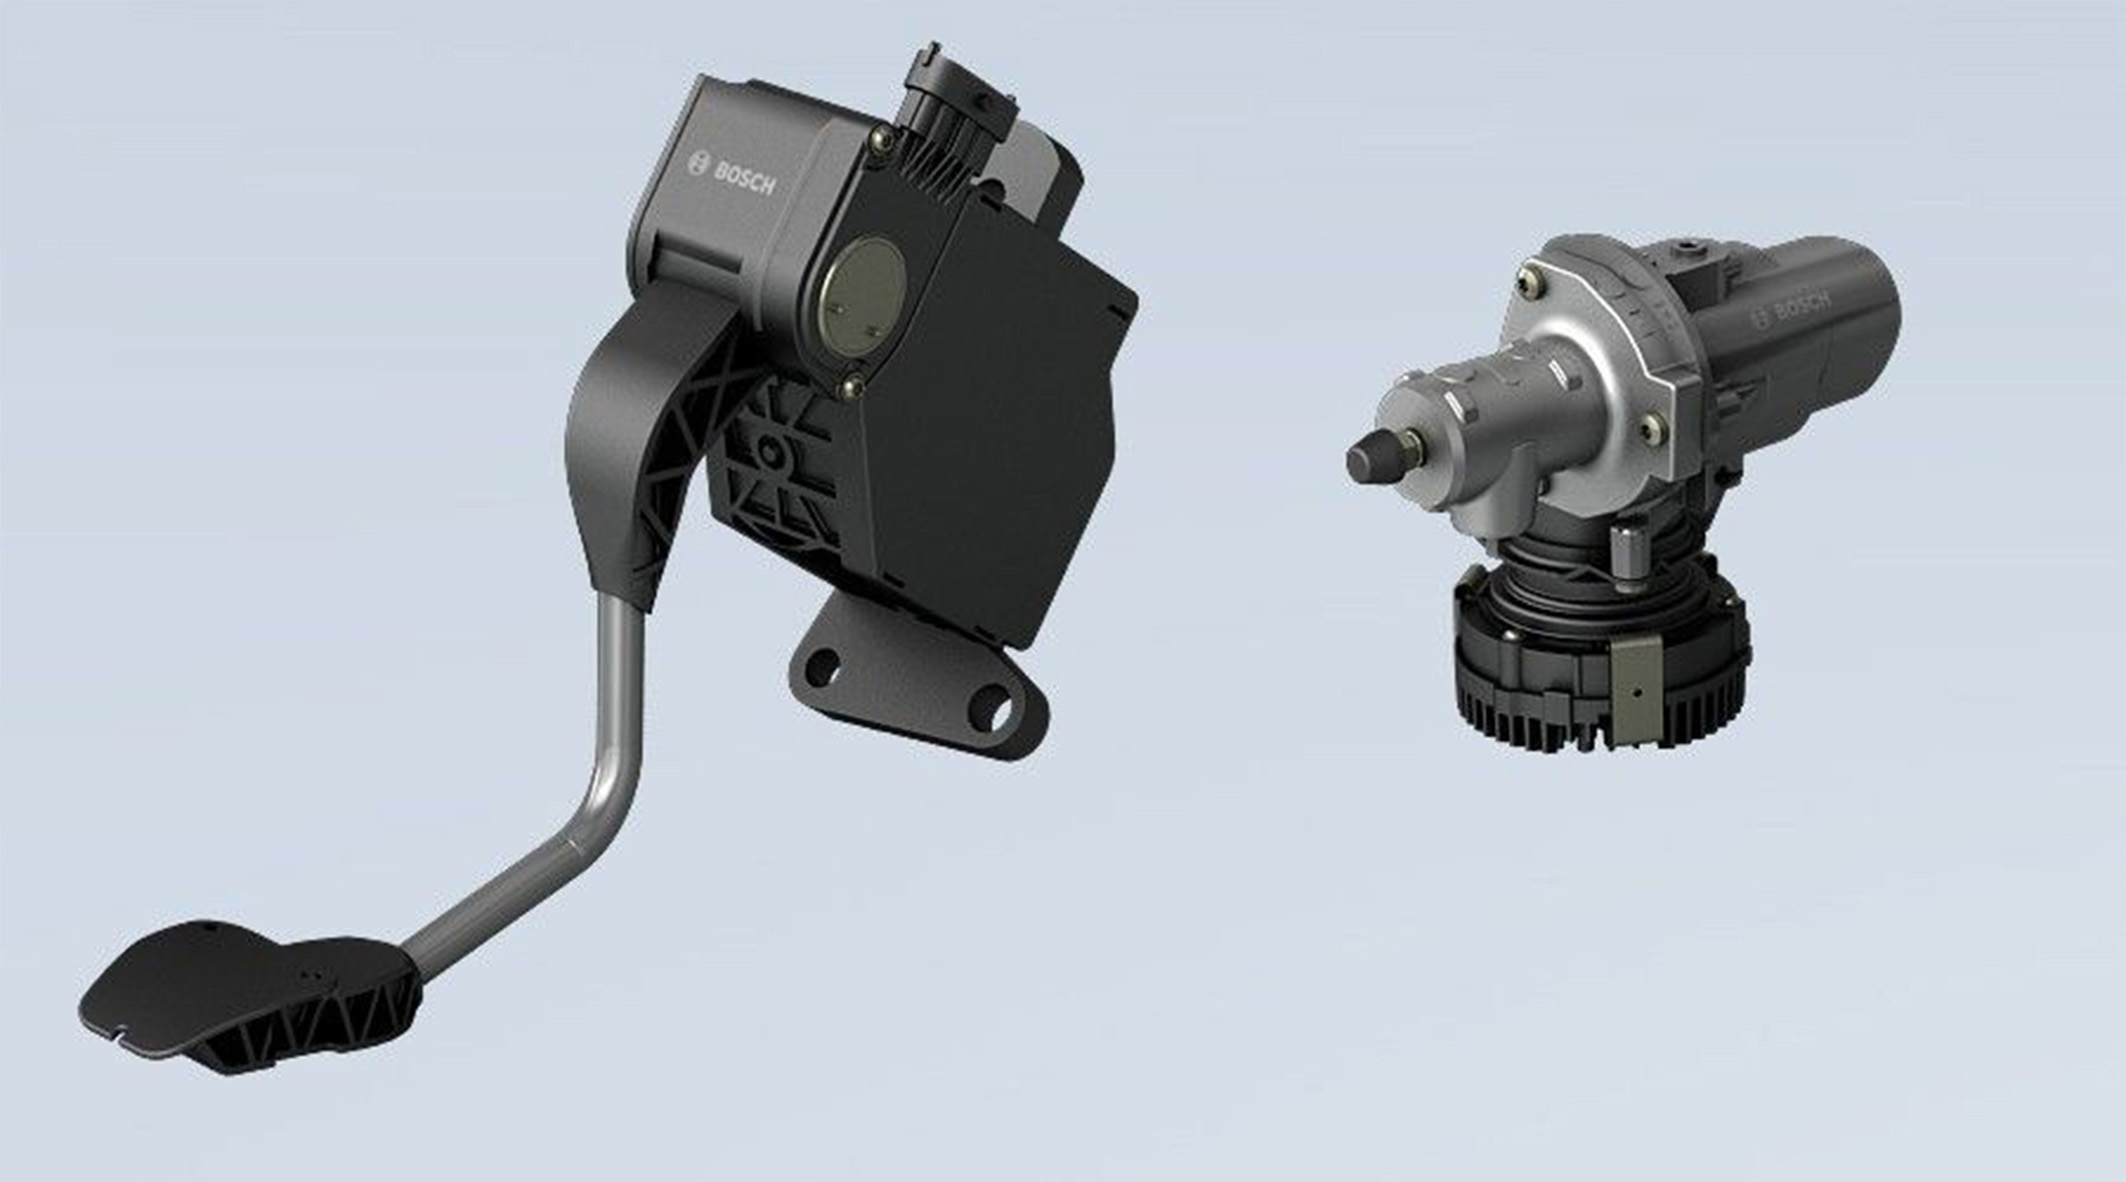 Bosch promises eClutch for smoother shifts and fuel savings